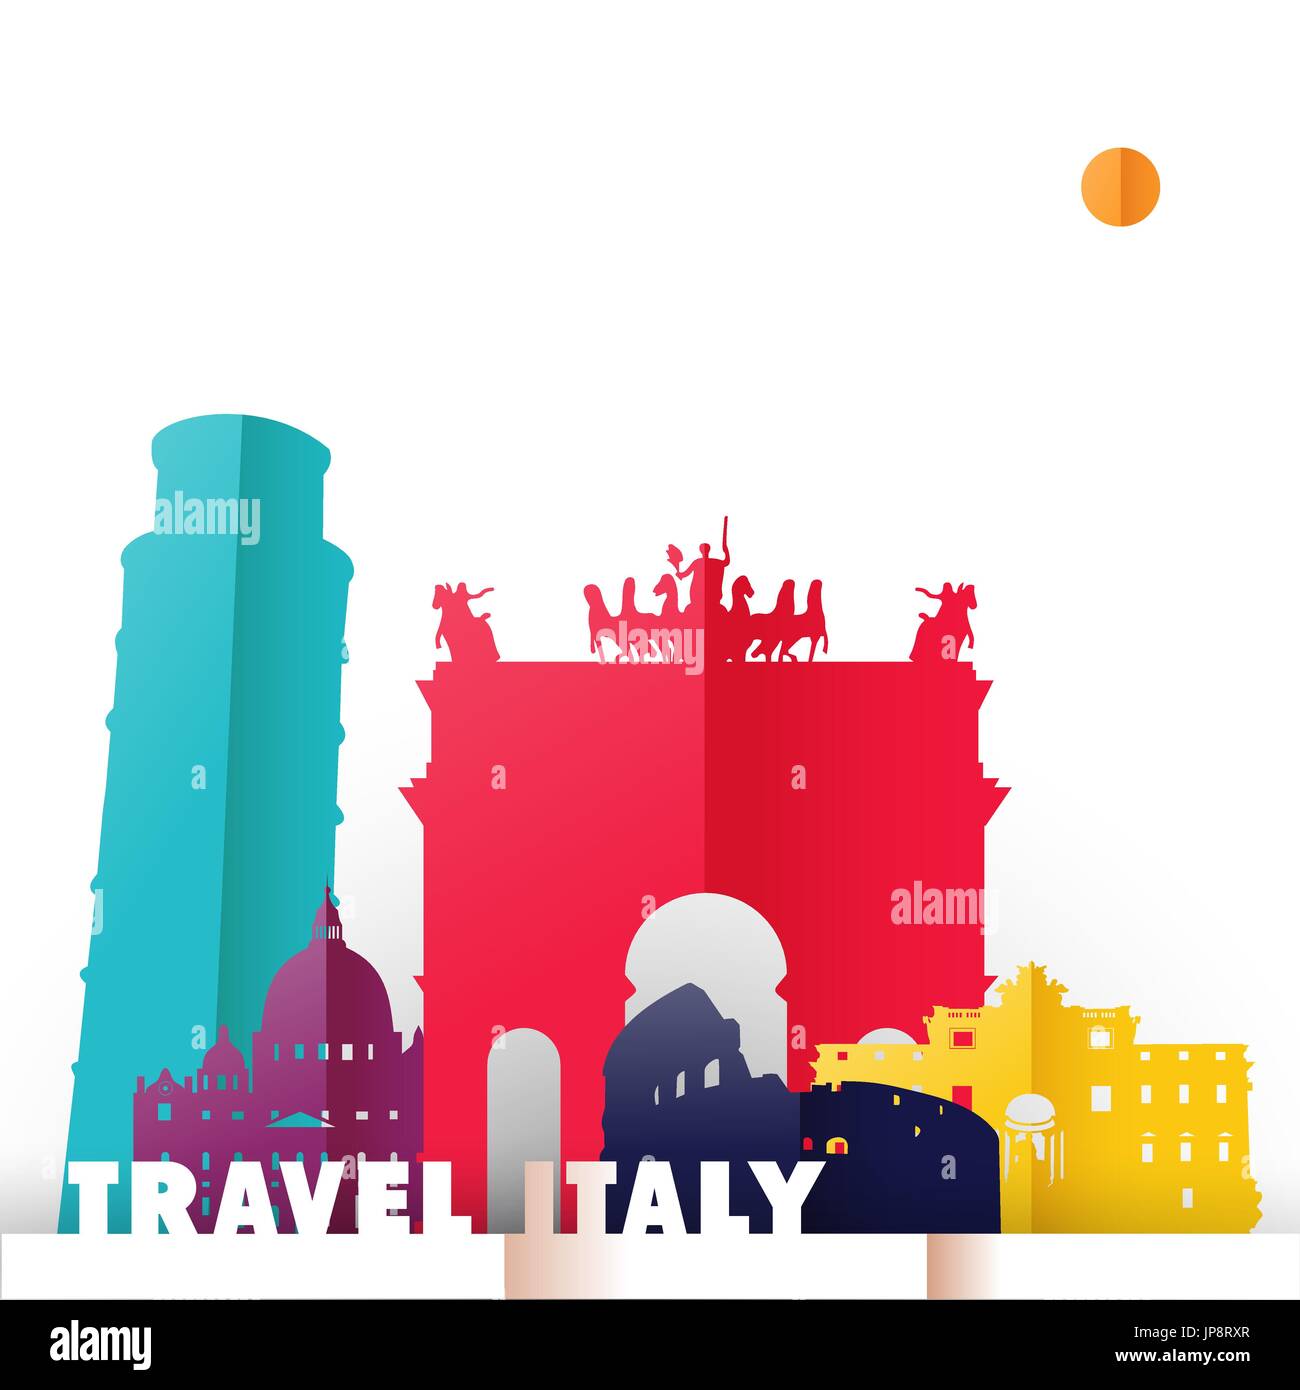 Travel Italy concept illustration in paper cut style, famous world landmarks of Italian country. Includes Pisa tower, Roman Colosseum, Trevi fountain. Stock Vector